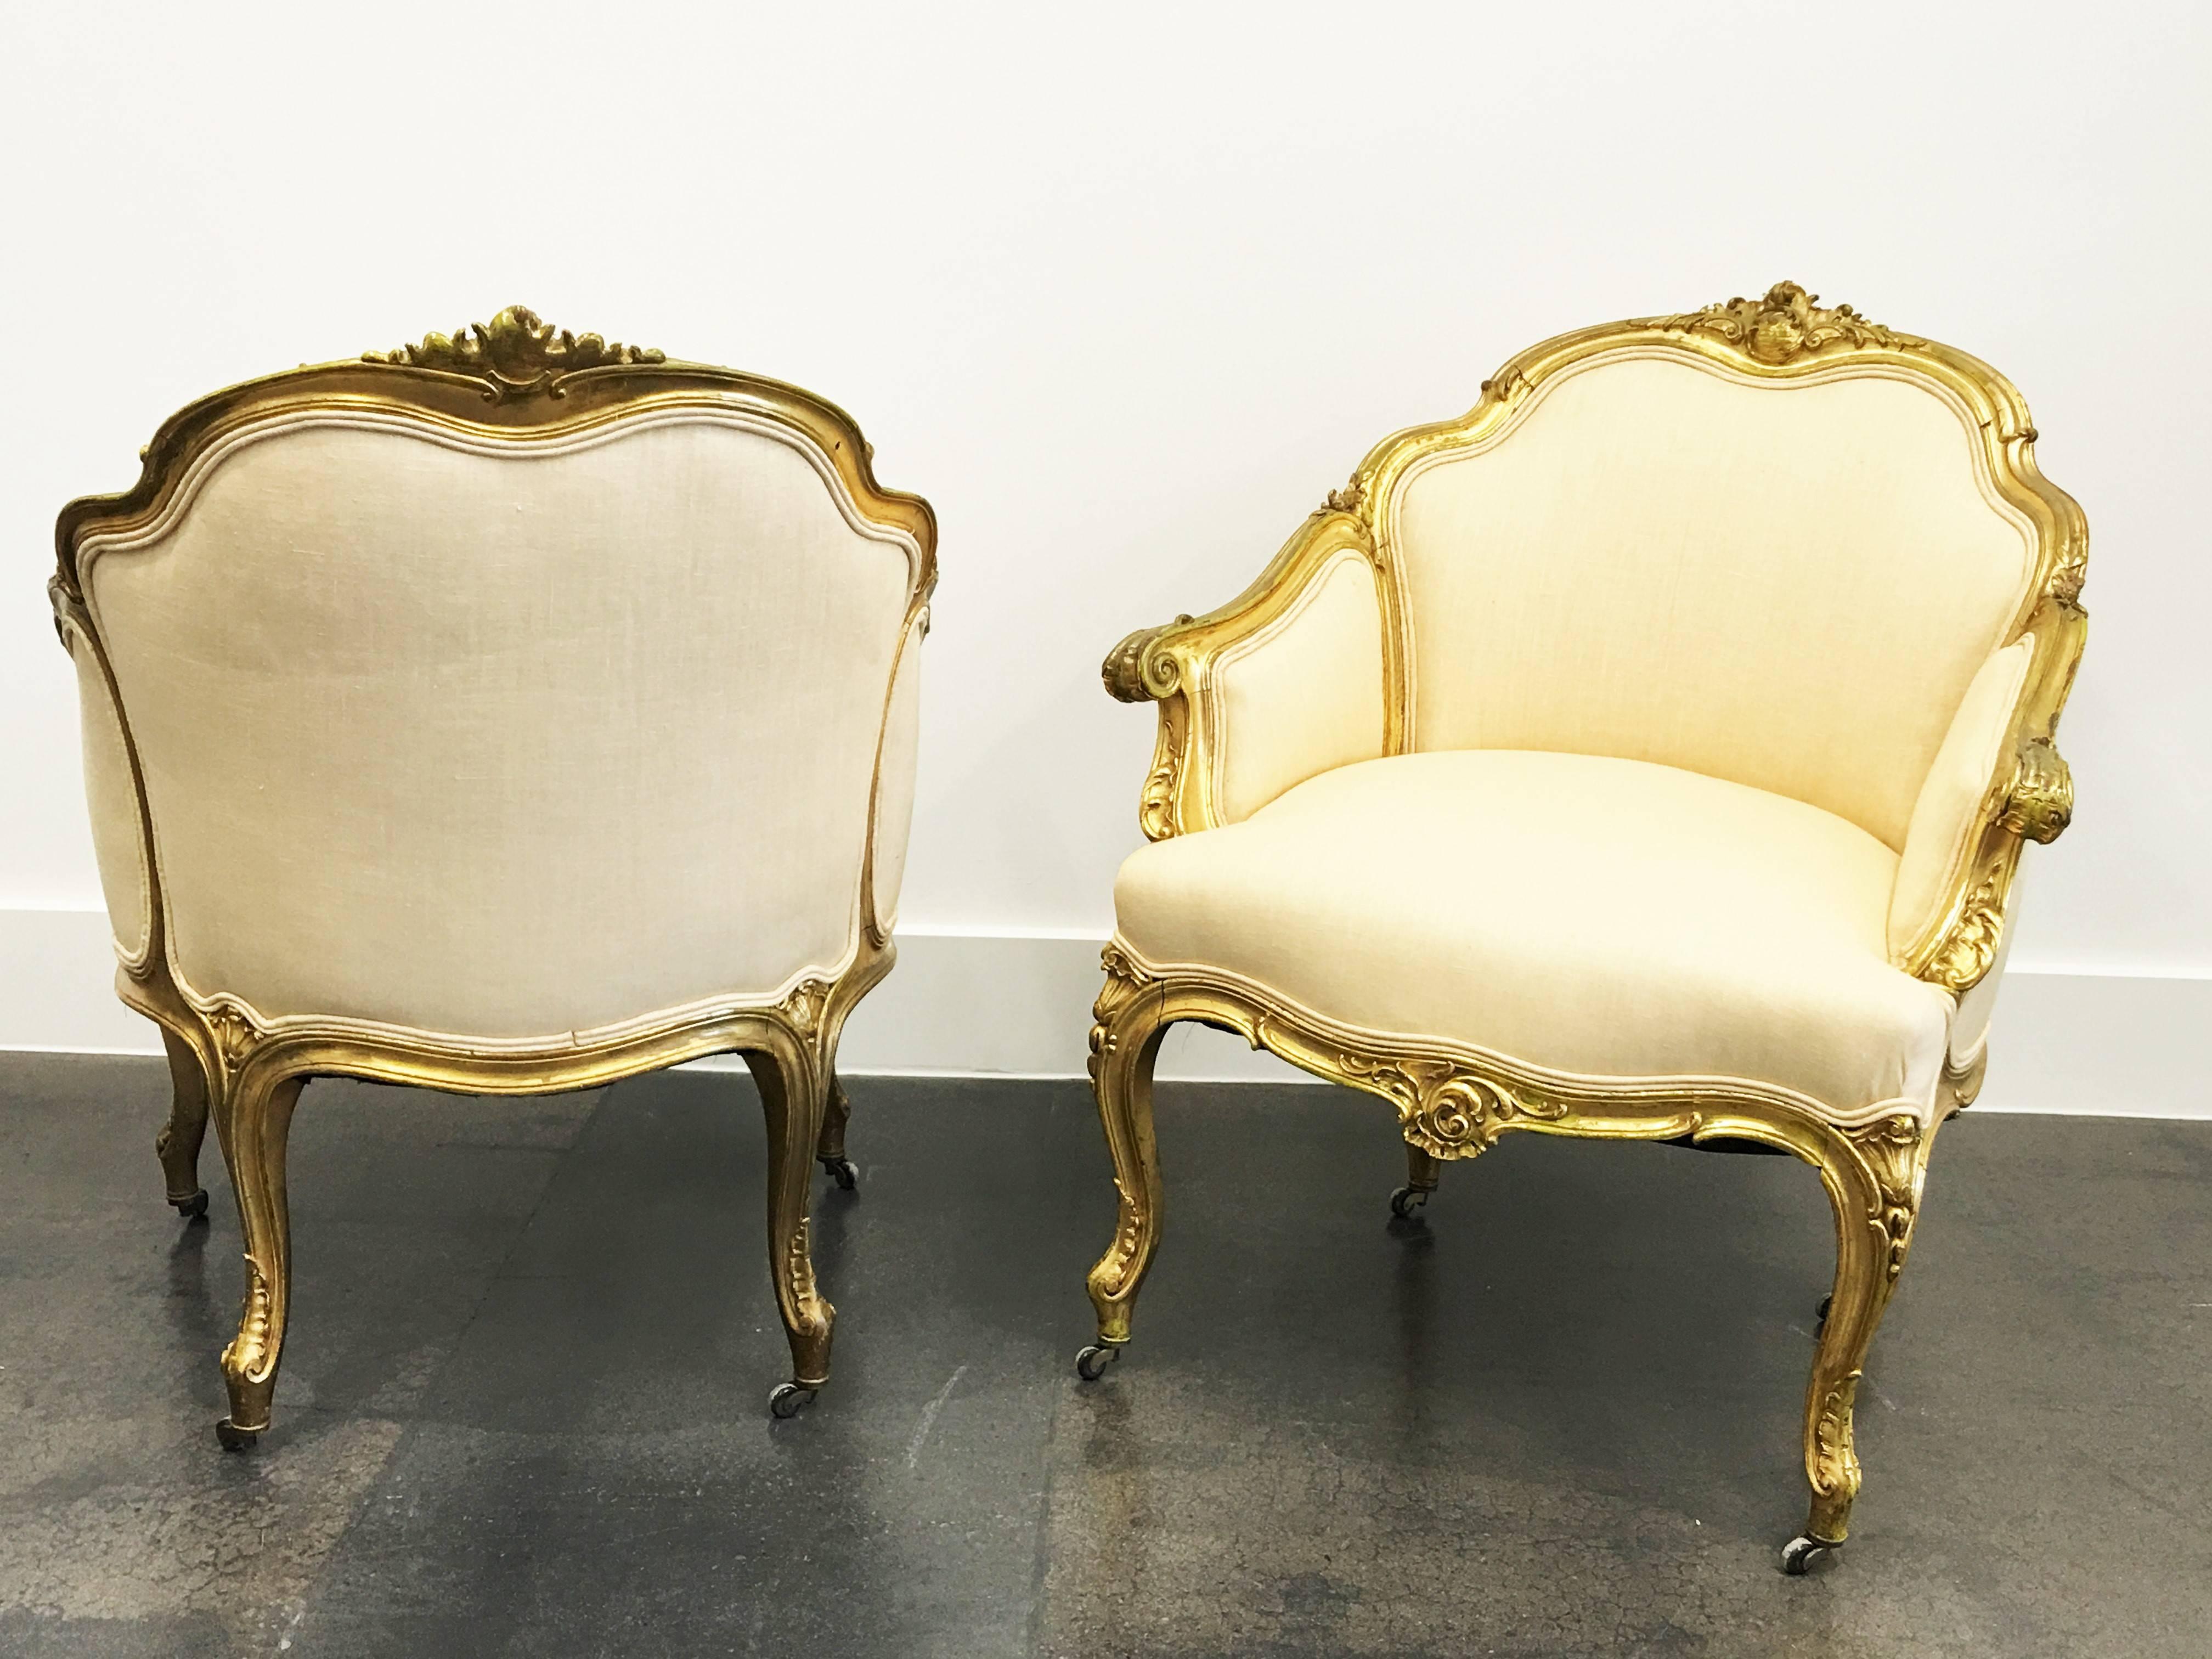 A wonderful pair of 19th century Louis XV giltwood bergeres. Features a carved giltwood frame. Raised by elegant cabriole legs with charming foliate carvings, centered by a fine pierced fluted seashell cabochon at the arbalest shaped frieze. The